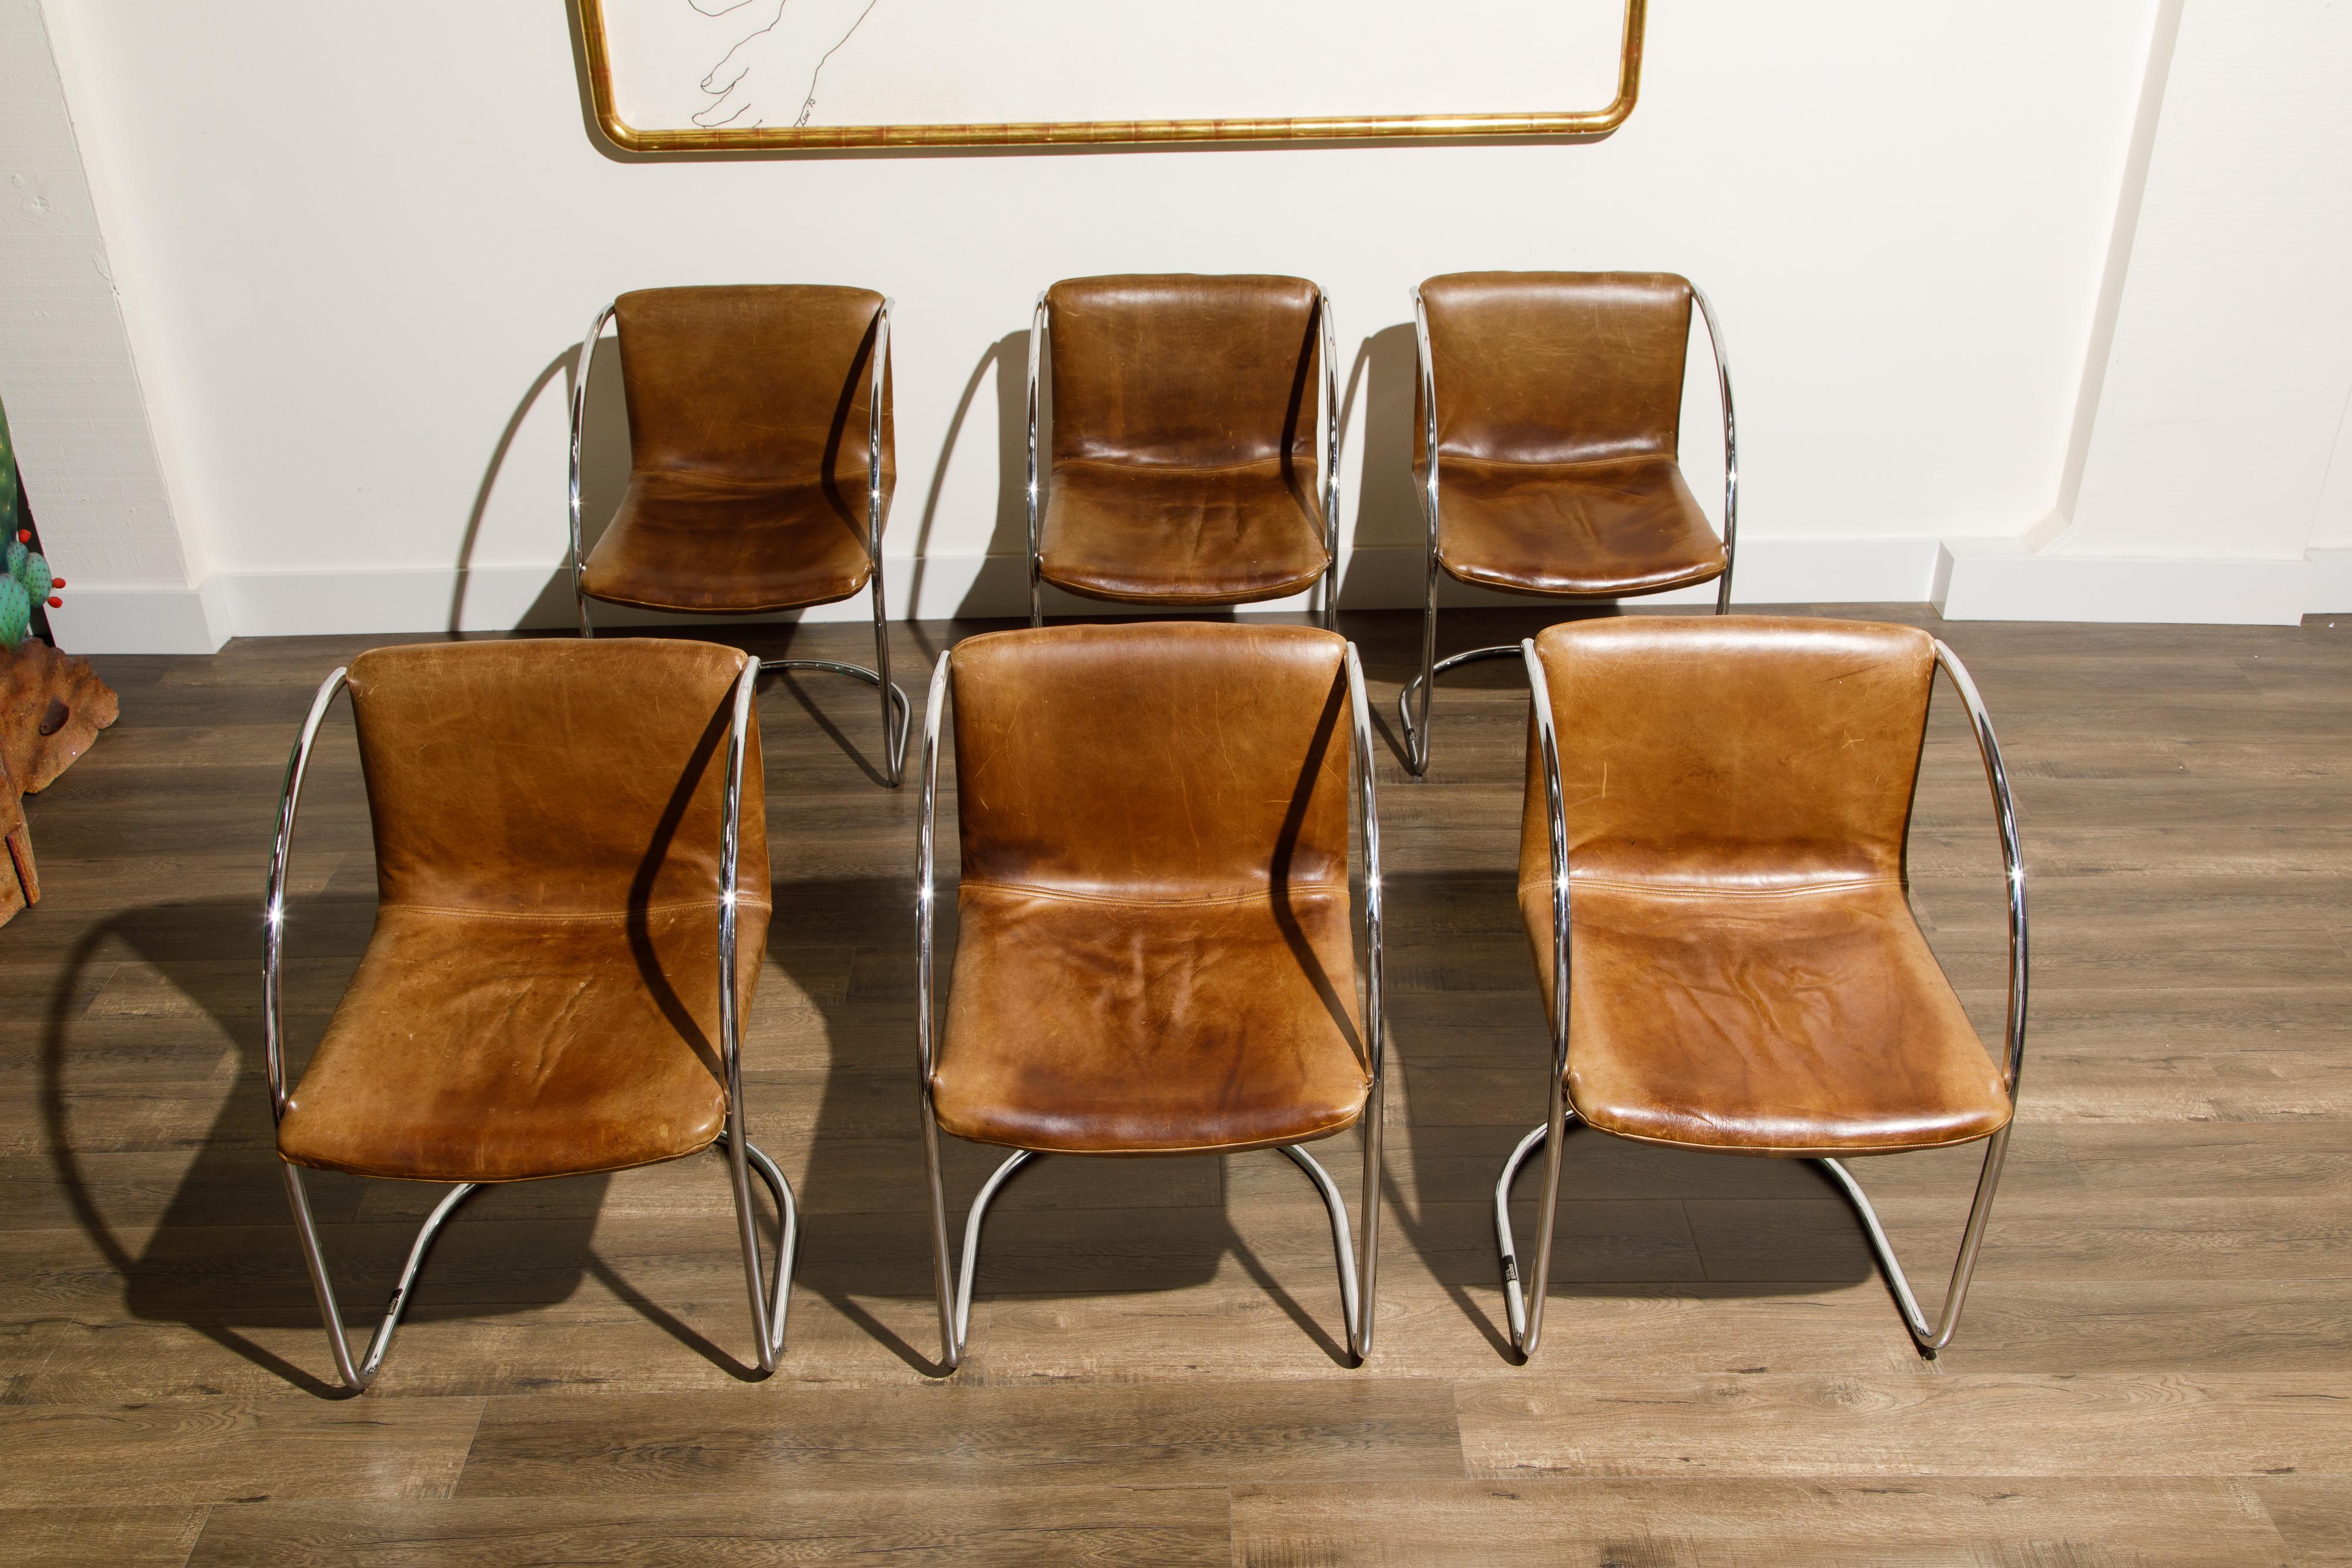 Modern 'Lens' Leather Chairs by Giovanni Offredi for Saporiti Italia, c. 1968, Signed